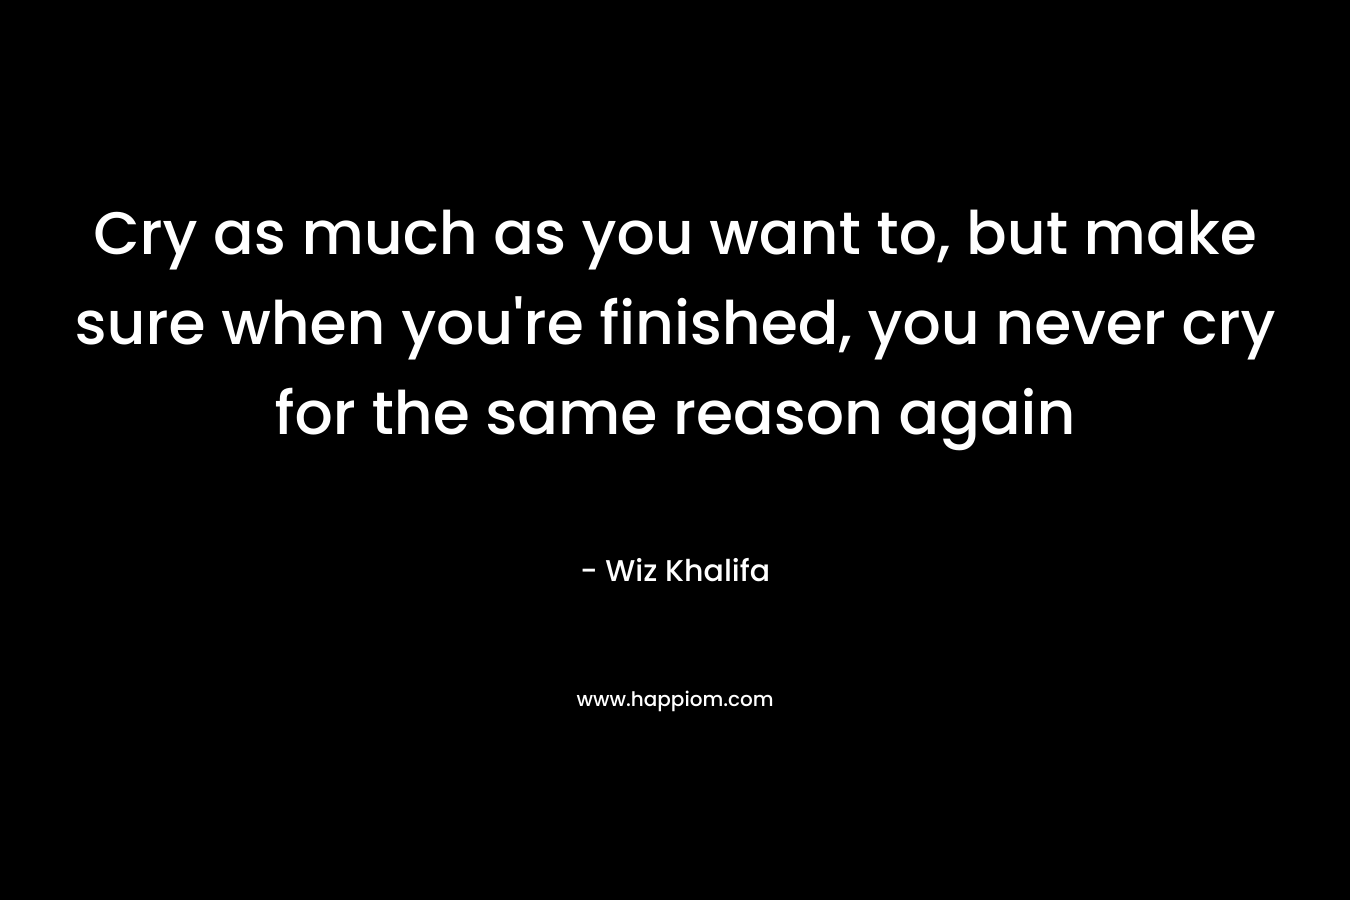 Cry as much as you want to, but make sure when you're finished, you never cry for the same reason again